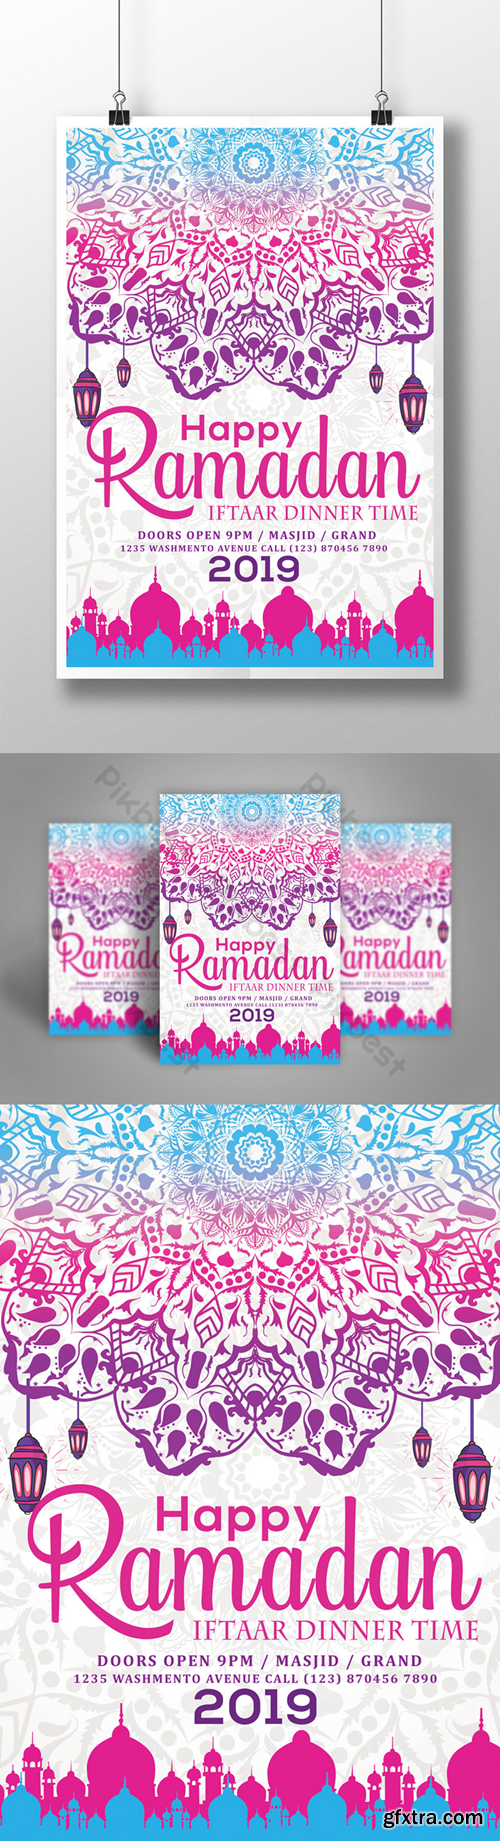 Happy Ramadan Kareem with Decorations and Mosques in Silhouette Flyer Templates Template PSD